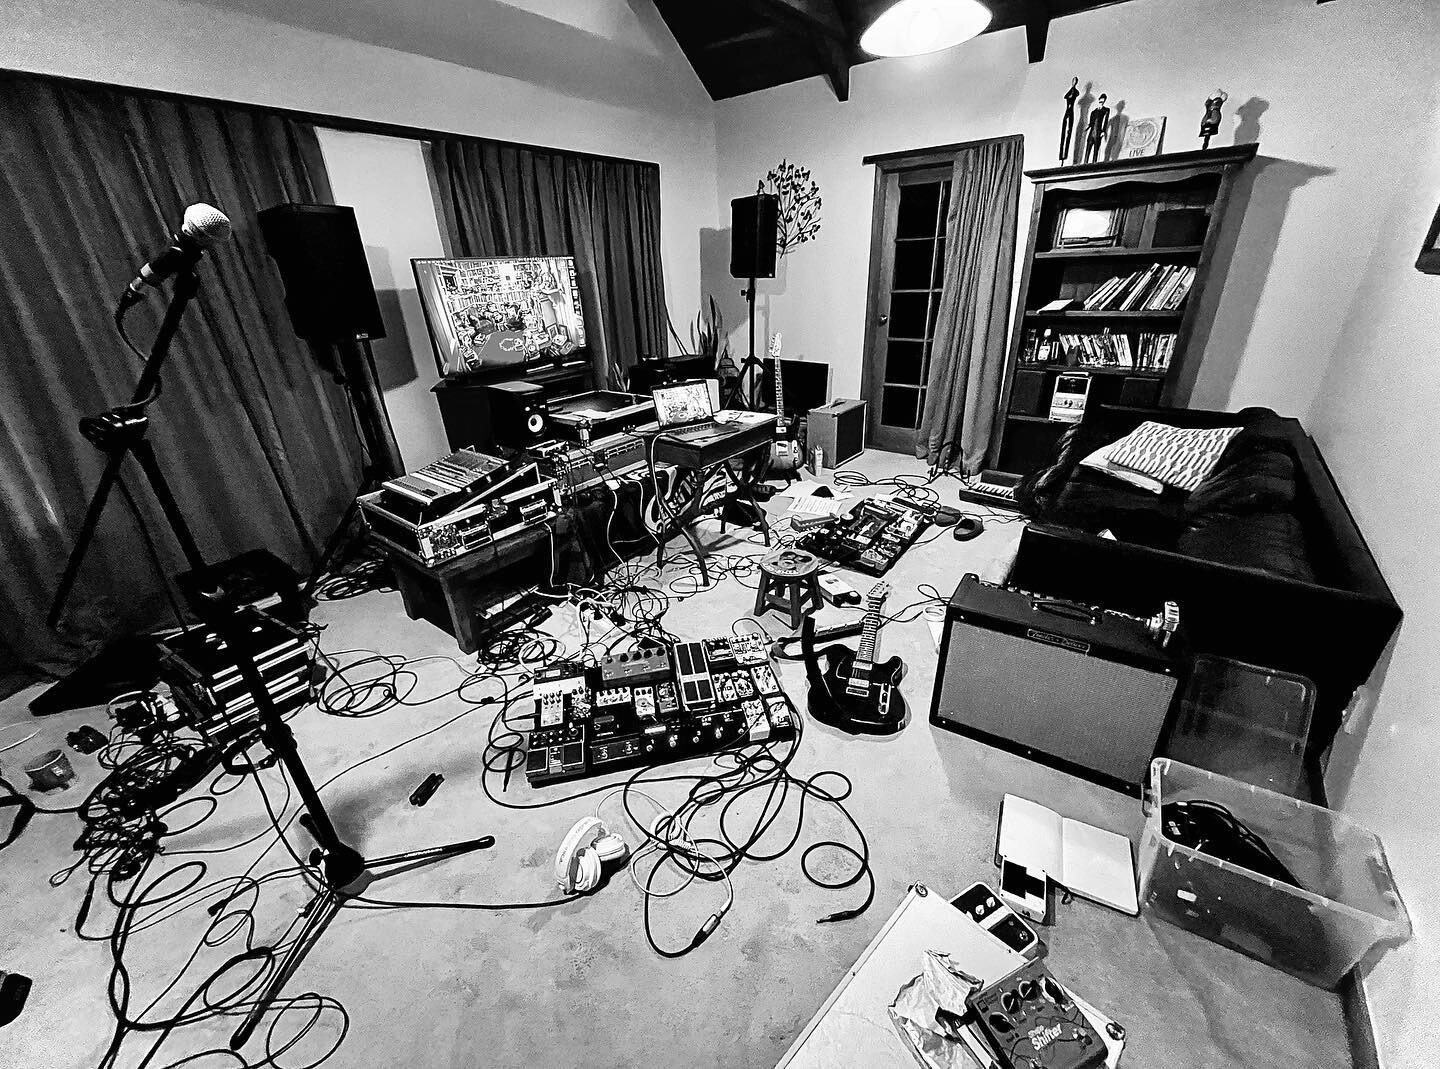 That&rsquo;s a wrap. After four days in the studio we&rsquo;re happy, tired, satisfied and excited to see what we&rsquo;ve got. Today we pack up and head home, rest up and start mixing. A massive thanks to @glenorchylakehouse for hosting us. If you&r